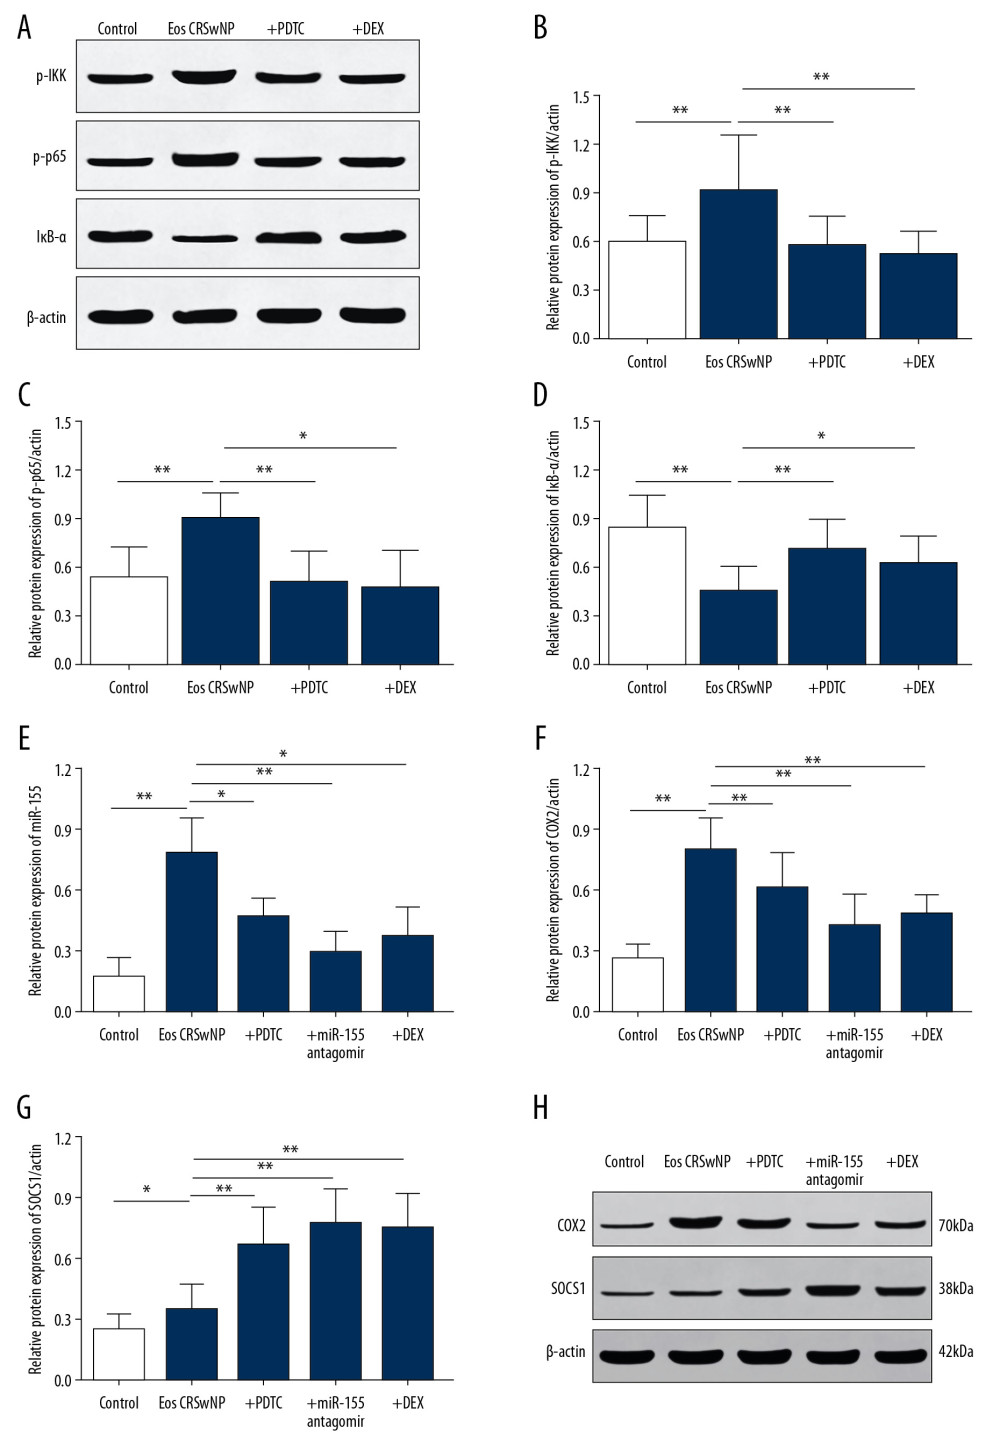 Expression of NF-κB/miR-155 in mice model of Eos CRSwNP. (A) Western blot analysis of p-IKK, p-p65, and IκB-α in control, Eos CRSwNP, PDTC, and DEX groups. (B–D) Statistical analysis displayed the expression of p-IKK and p-p65 were significantly increased while the expression of IκB-α was decreased in the Eos CRSwNP group. However, the application of PDTC or DEX reversed the expression alterations, which was similar with the control group. (E) The expression of miR-155 was significantly increased in the Eos CRSwNP group. The application of PDTC, miR-155 antagomir, or DEX abolished the elevation of miR-155 in the Eos CRSwNP group. (F, G) Statistical analysis showed that after application of PDTC, miR-155 antagomir, or DEX, the expression of COX2 was significantly decreased while the expression of SOCS1 was significantly increased in the Eos CRSwNP group. (H) Western blot analysis of COX2 and SOCS1 in groups. * P<0.05; ** P<0.01. NF-κB – nuclear factor κB; Eos CRSwNP – eosinophilic chronic rhinosinusitis with nasal polyps; DEX – dexamethasone; PDTC – pyrrolidine dithiocarbonate.